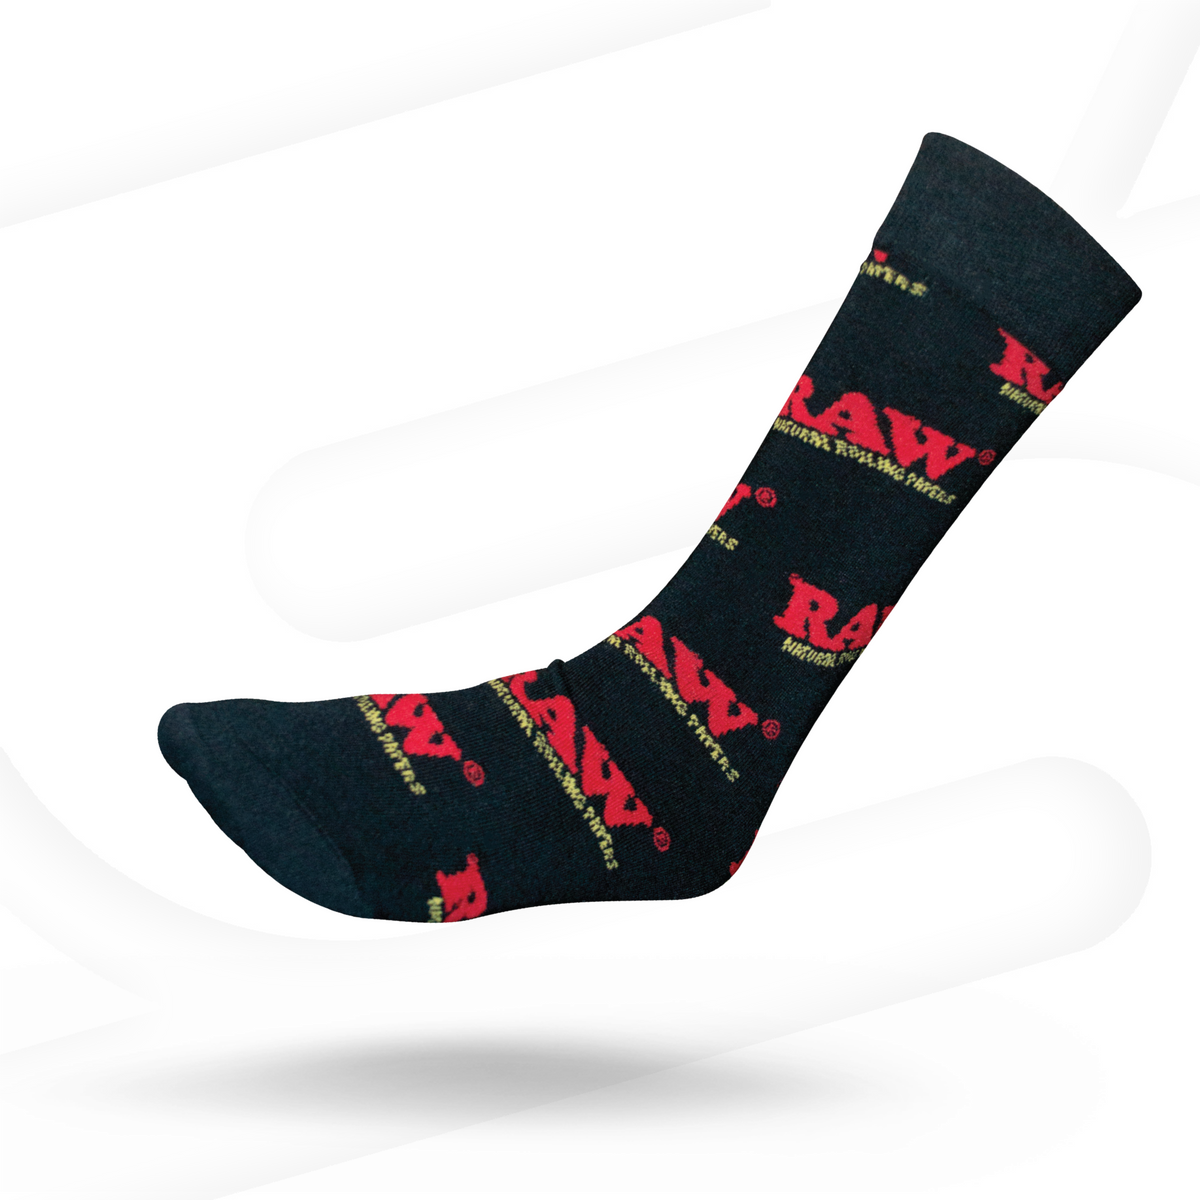 RAW Socks Clothing Accessories WAR00526-MUSA01 esd-official